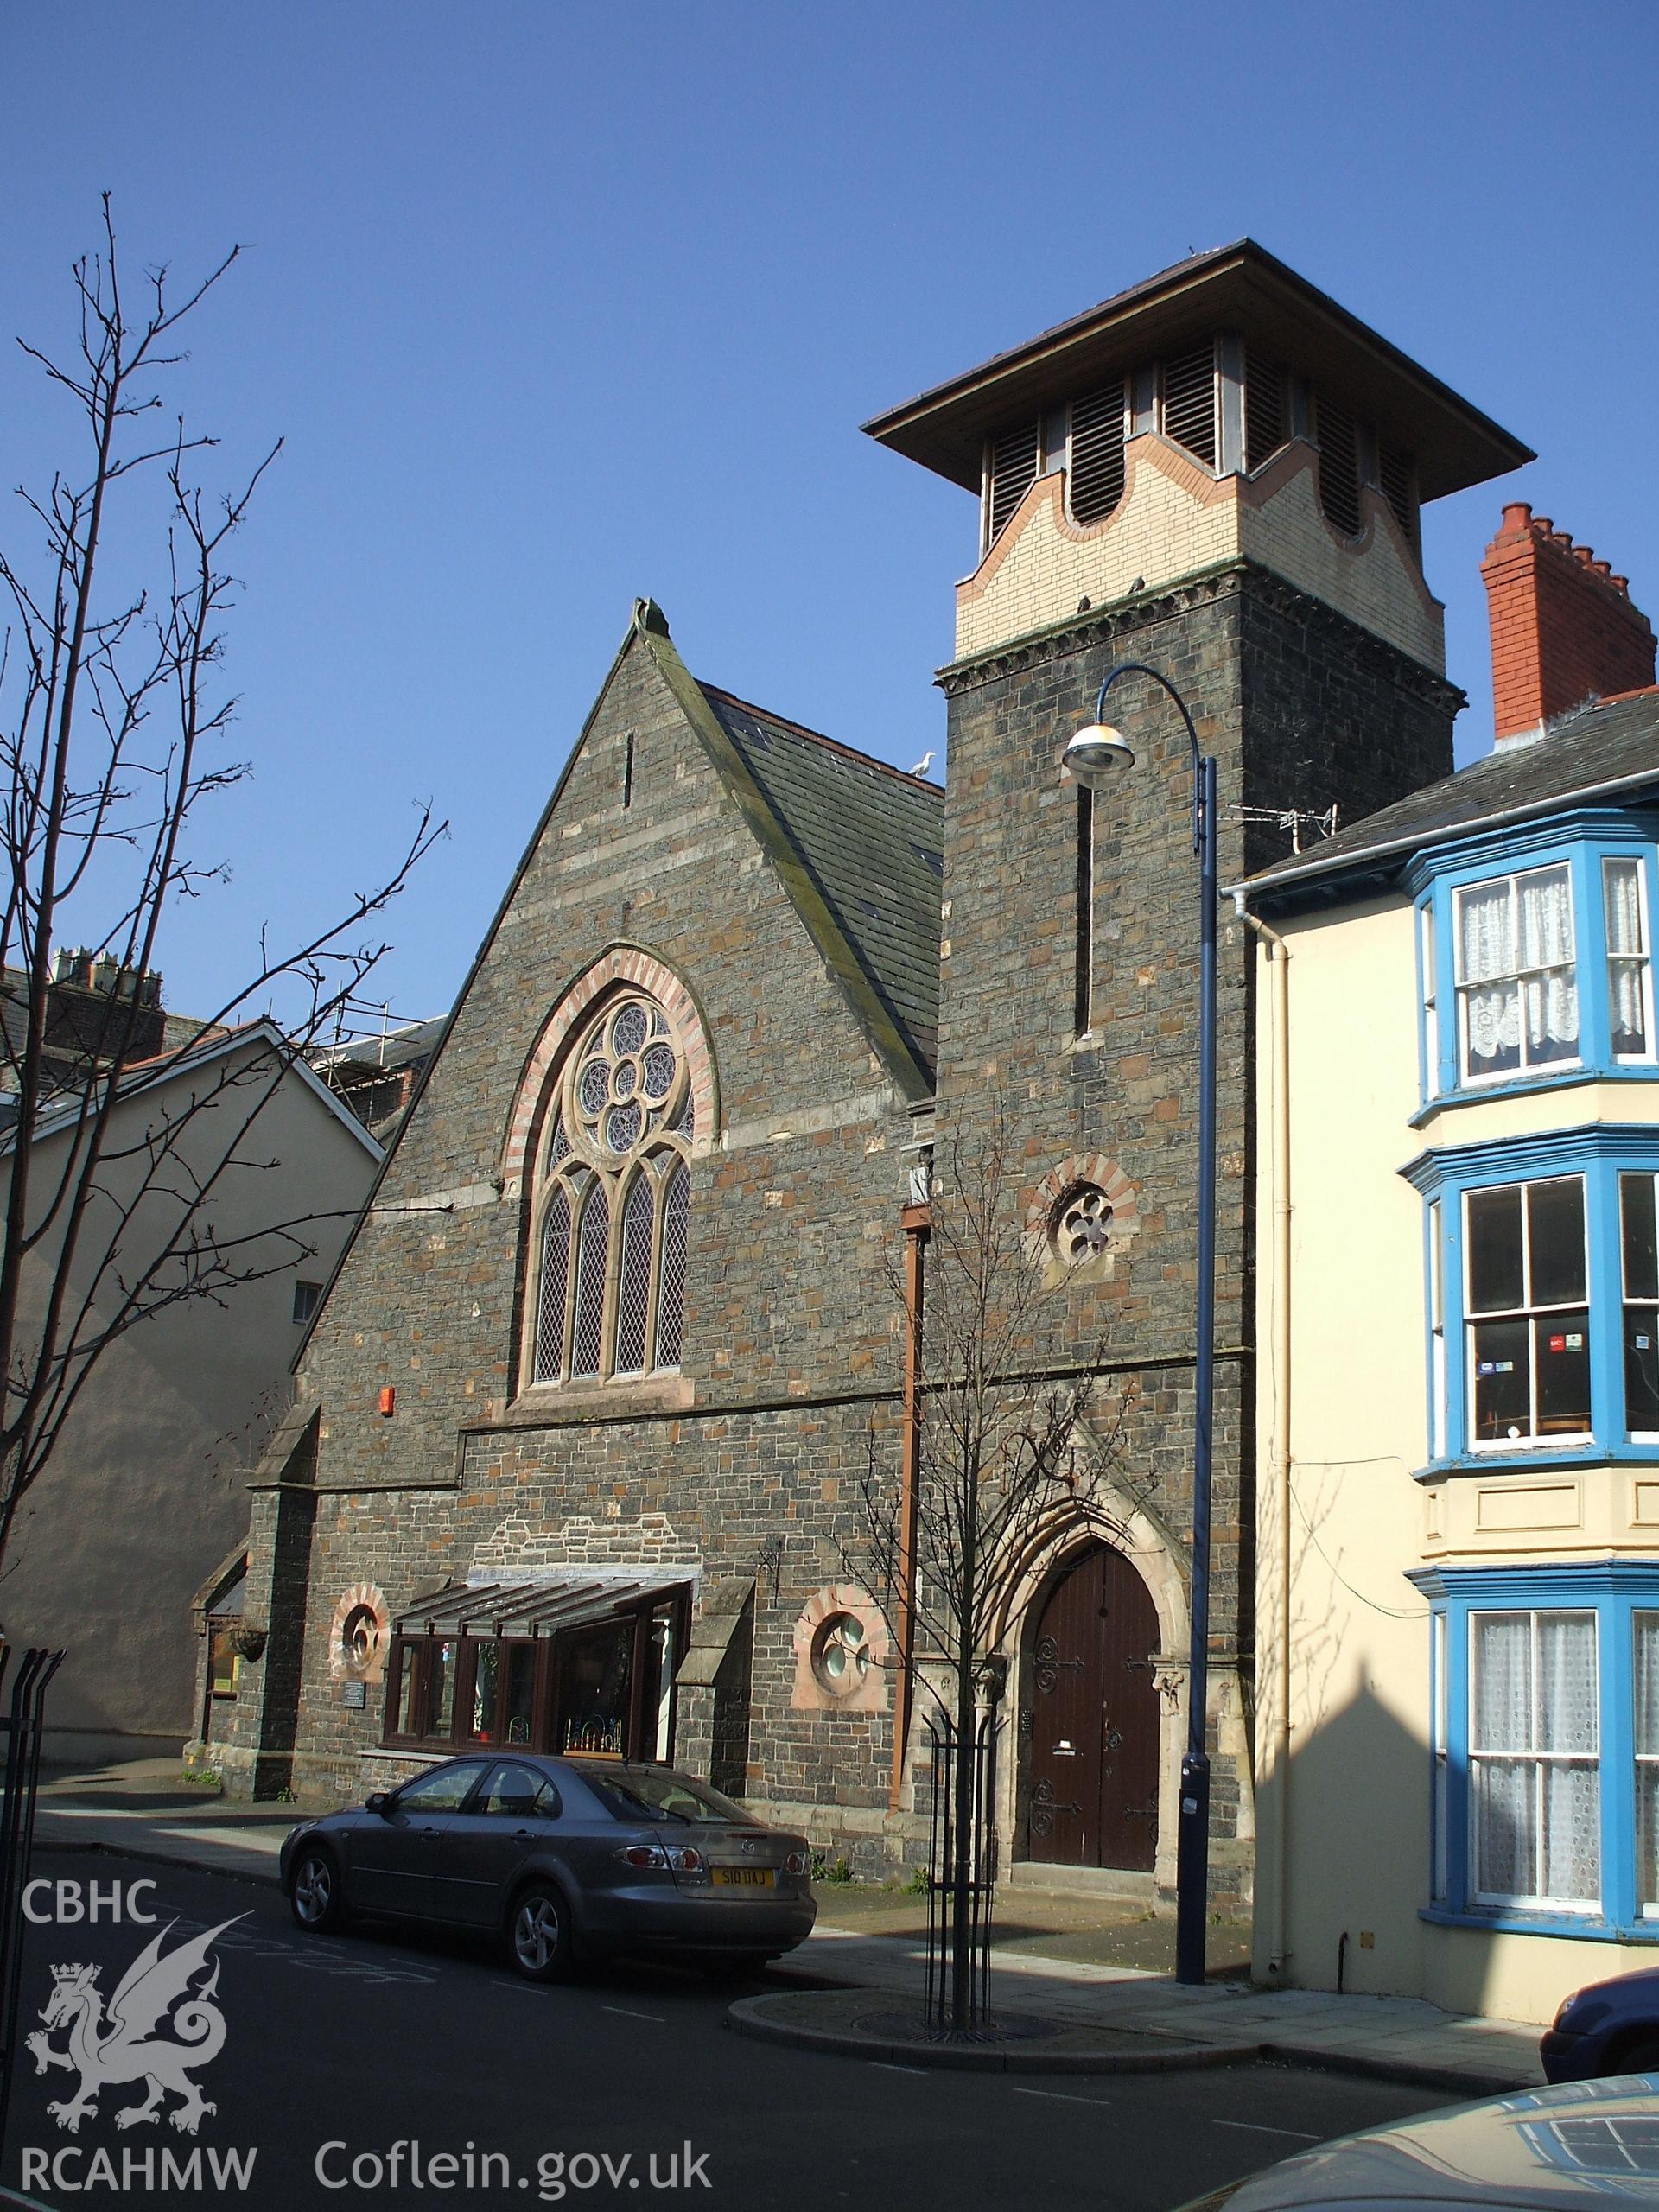 Colour digital photograph showing the front exterior of the former Portland Street English Congregational church, now Church surgery.